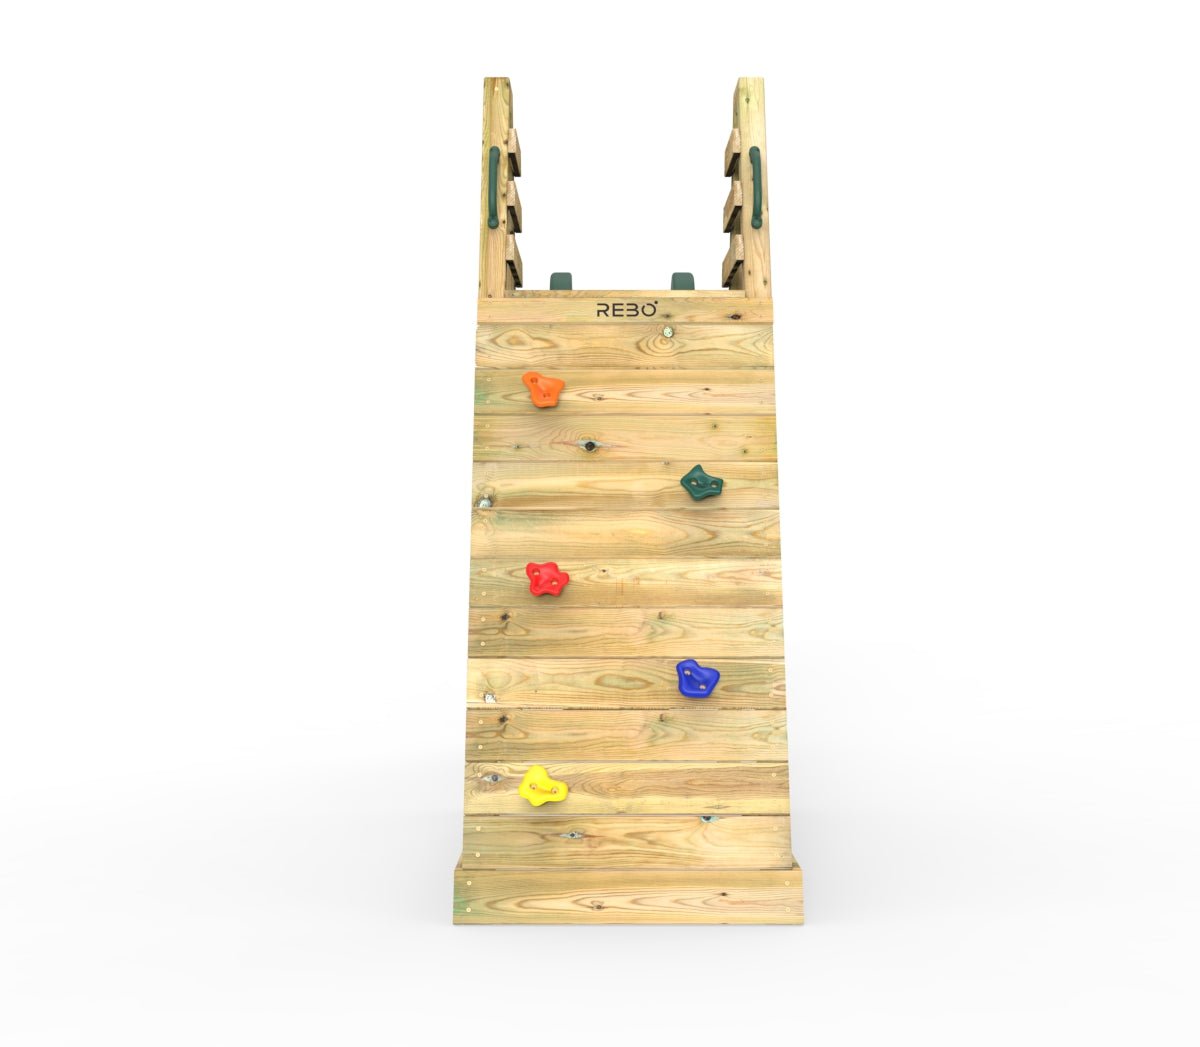 Rebo Wooden Free Standing Slide with 10ft Water Slide - with Climbing Wall